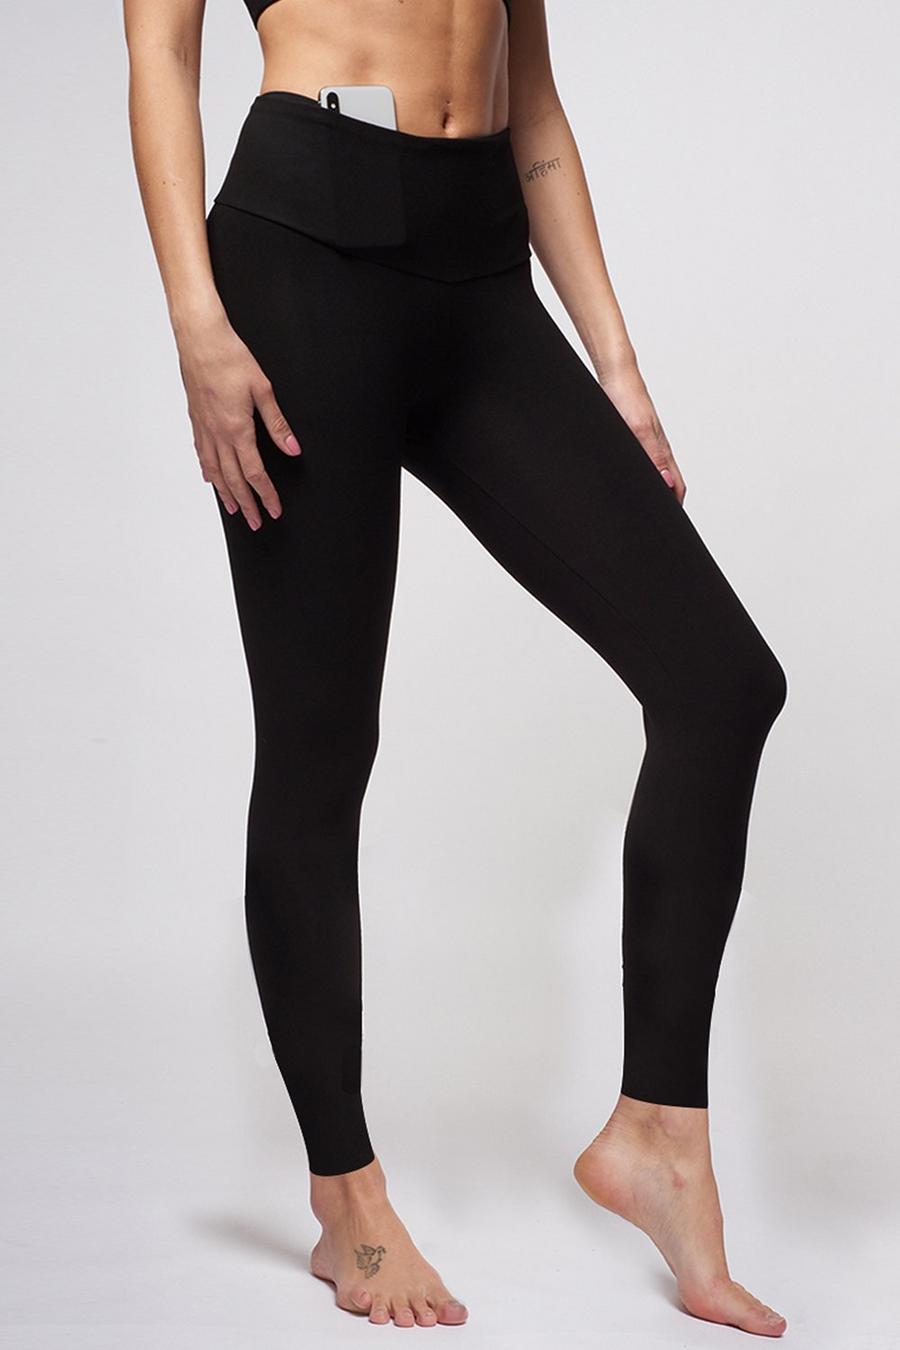 Black Extra Strong Compression Leggings with Figure Firming SHORT